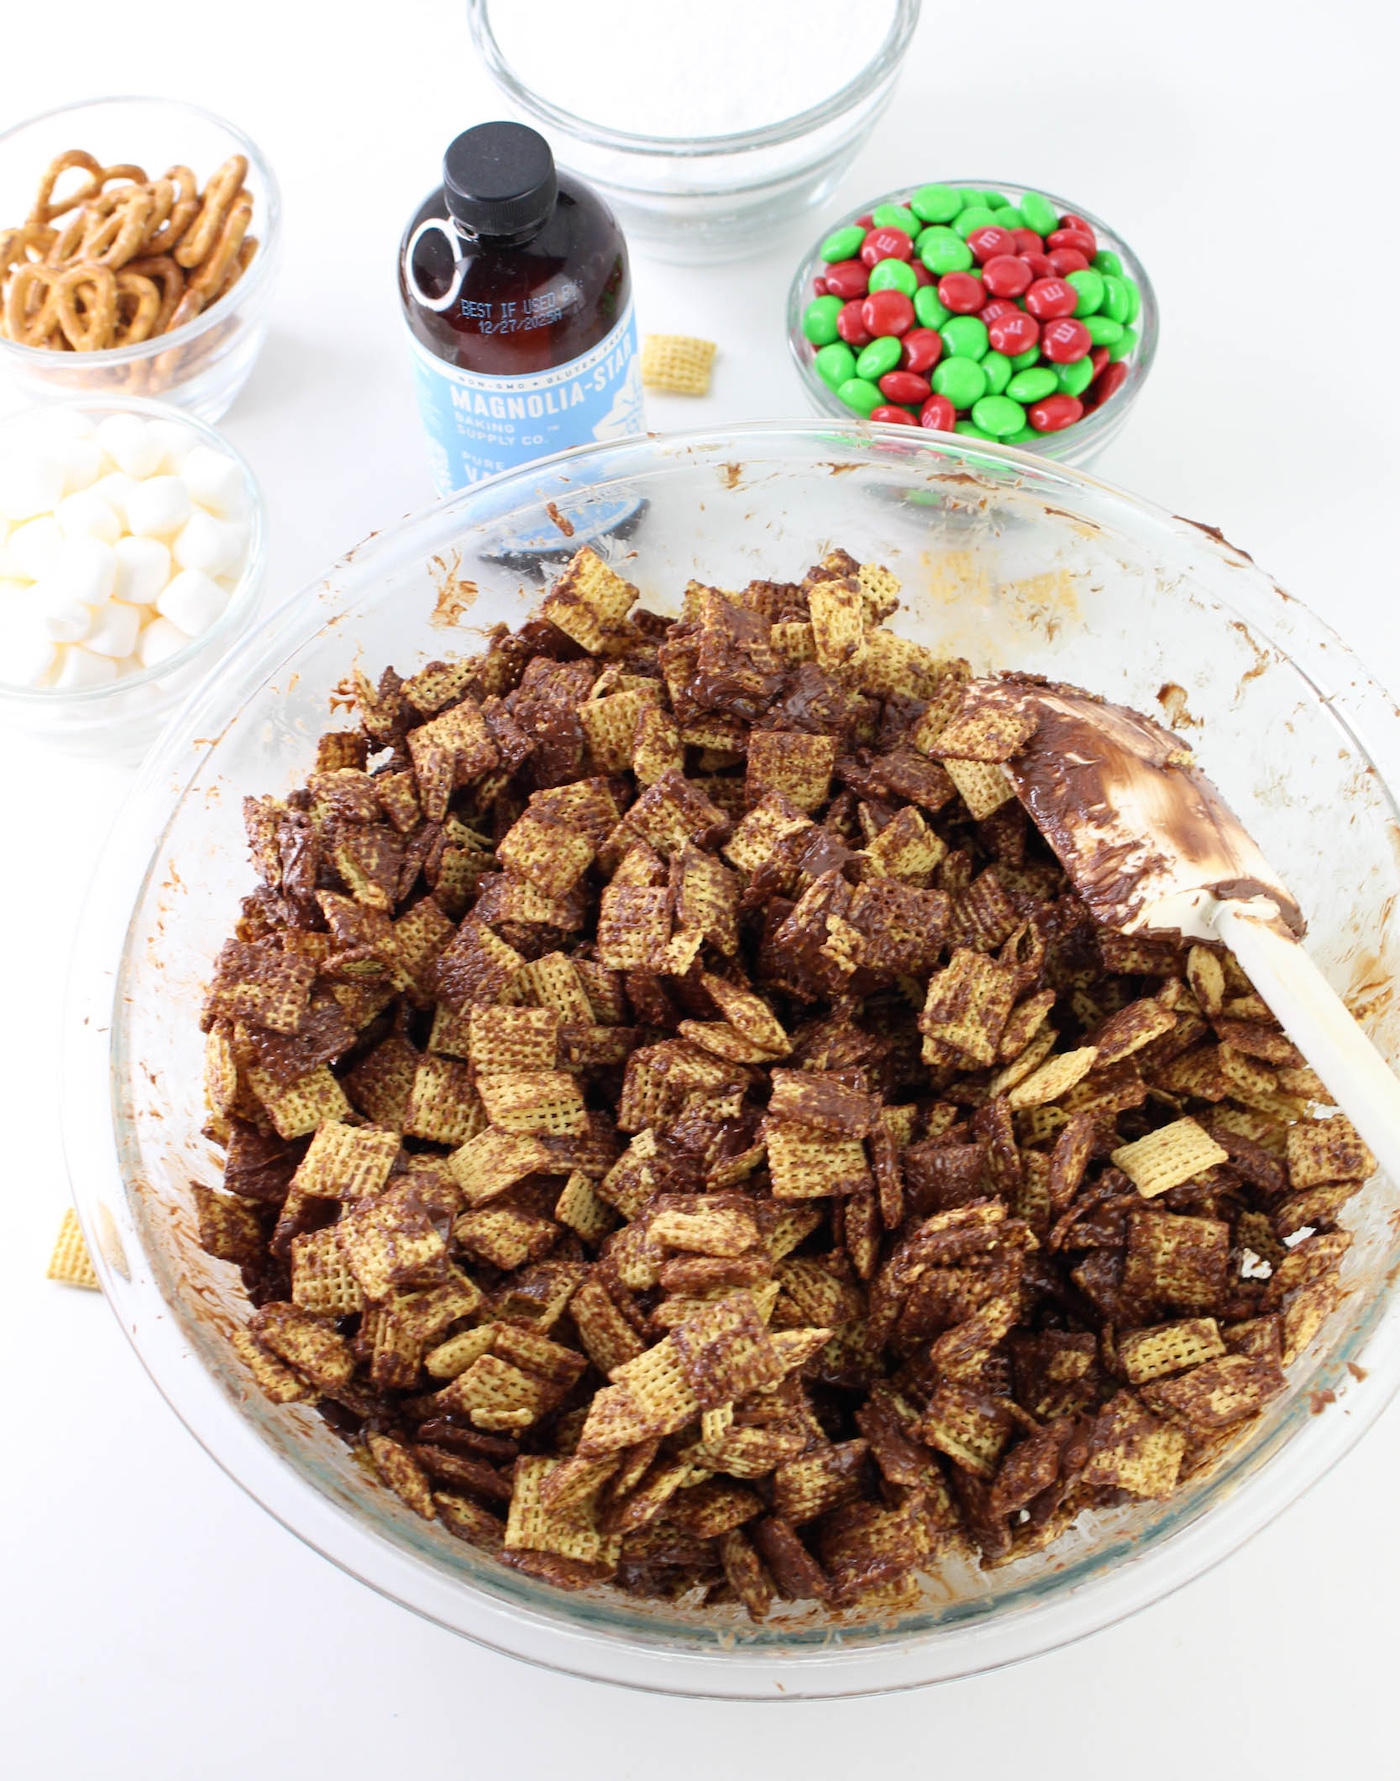 Chex cereal mixed with melted peanut butter and chocolate